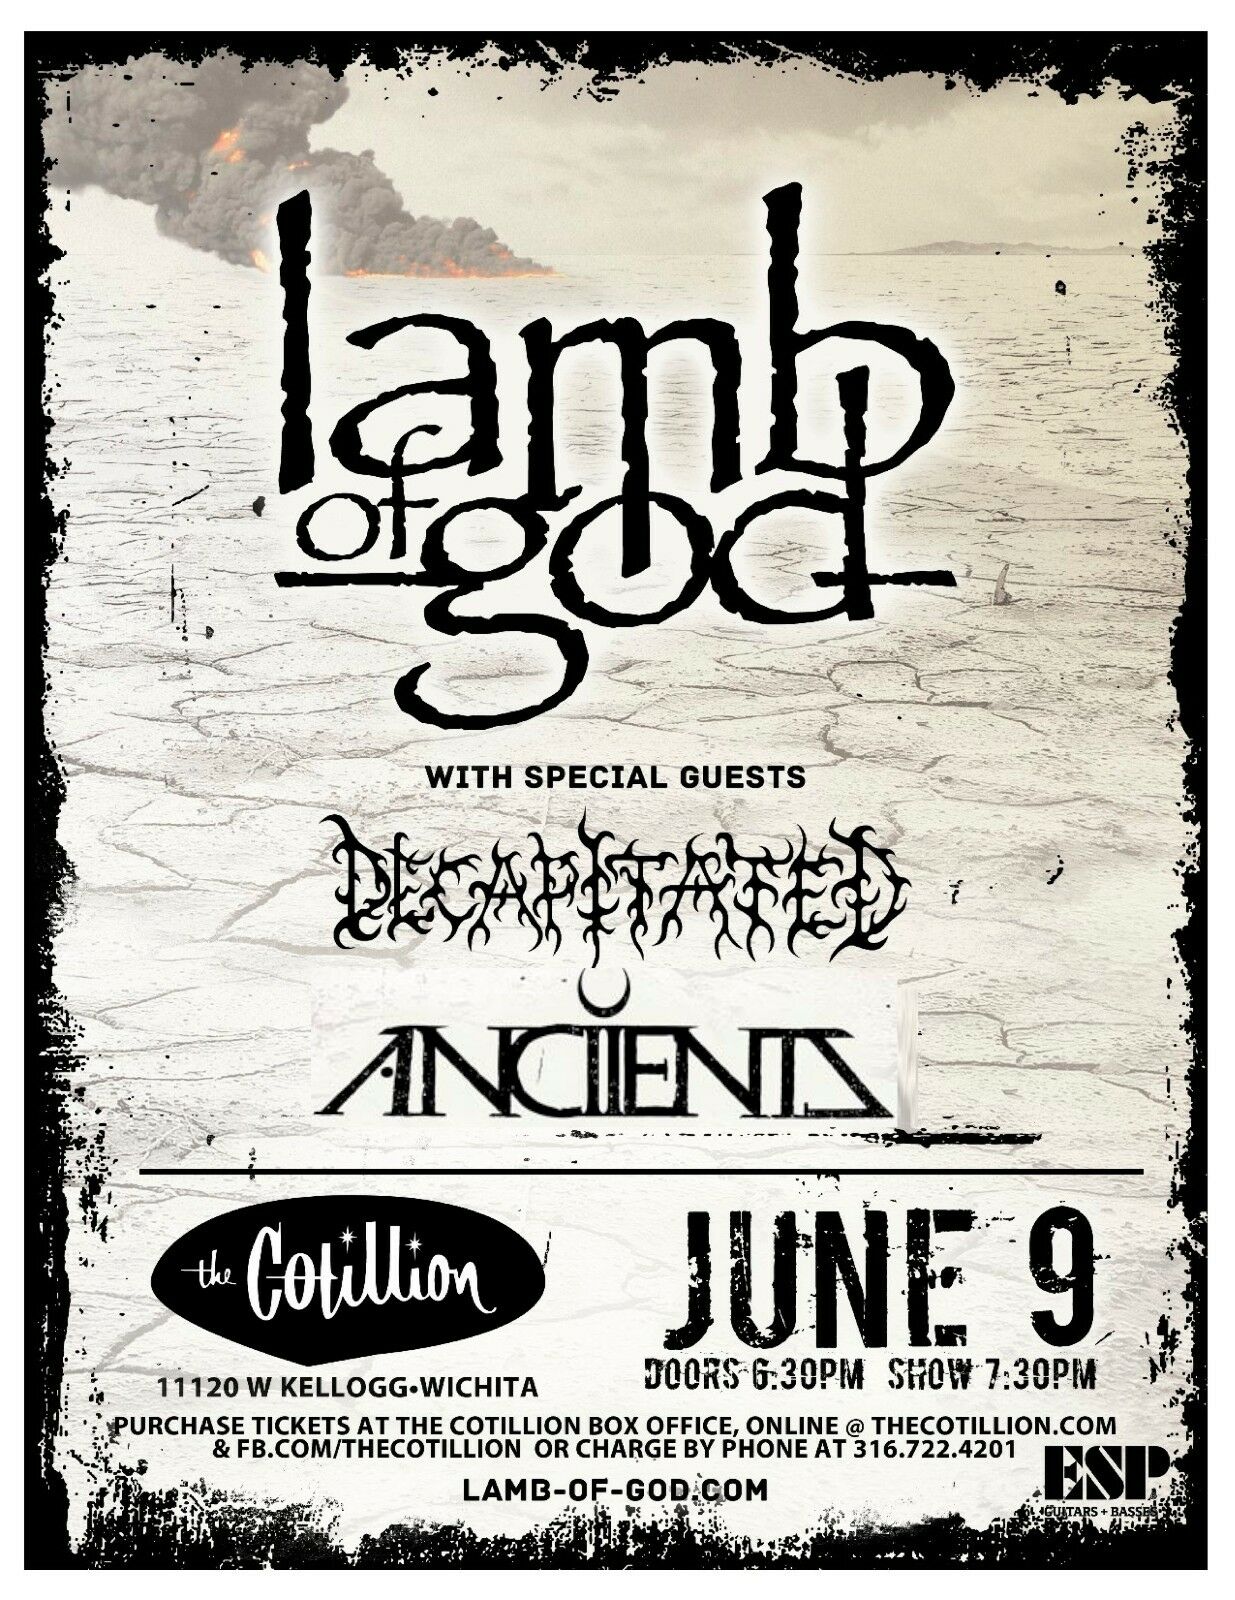 Lamb Of God /decapitated /ancients 2013 Wichita Concert Tour Poster-groove Metal